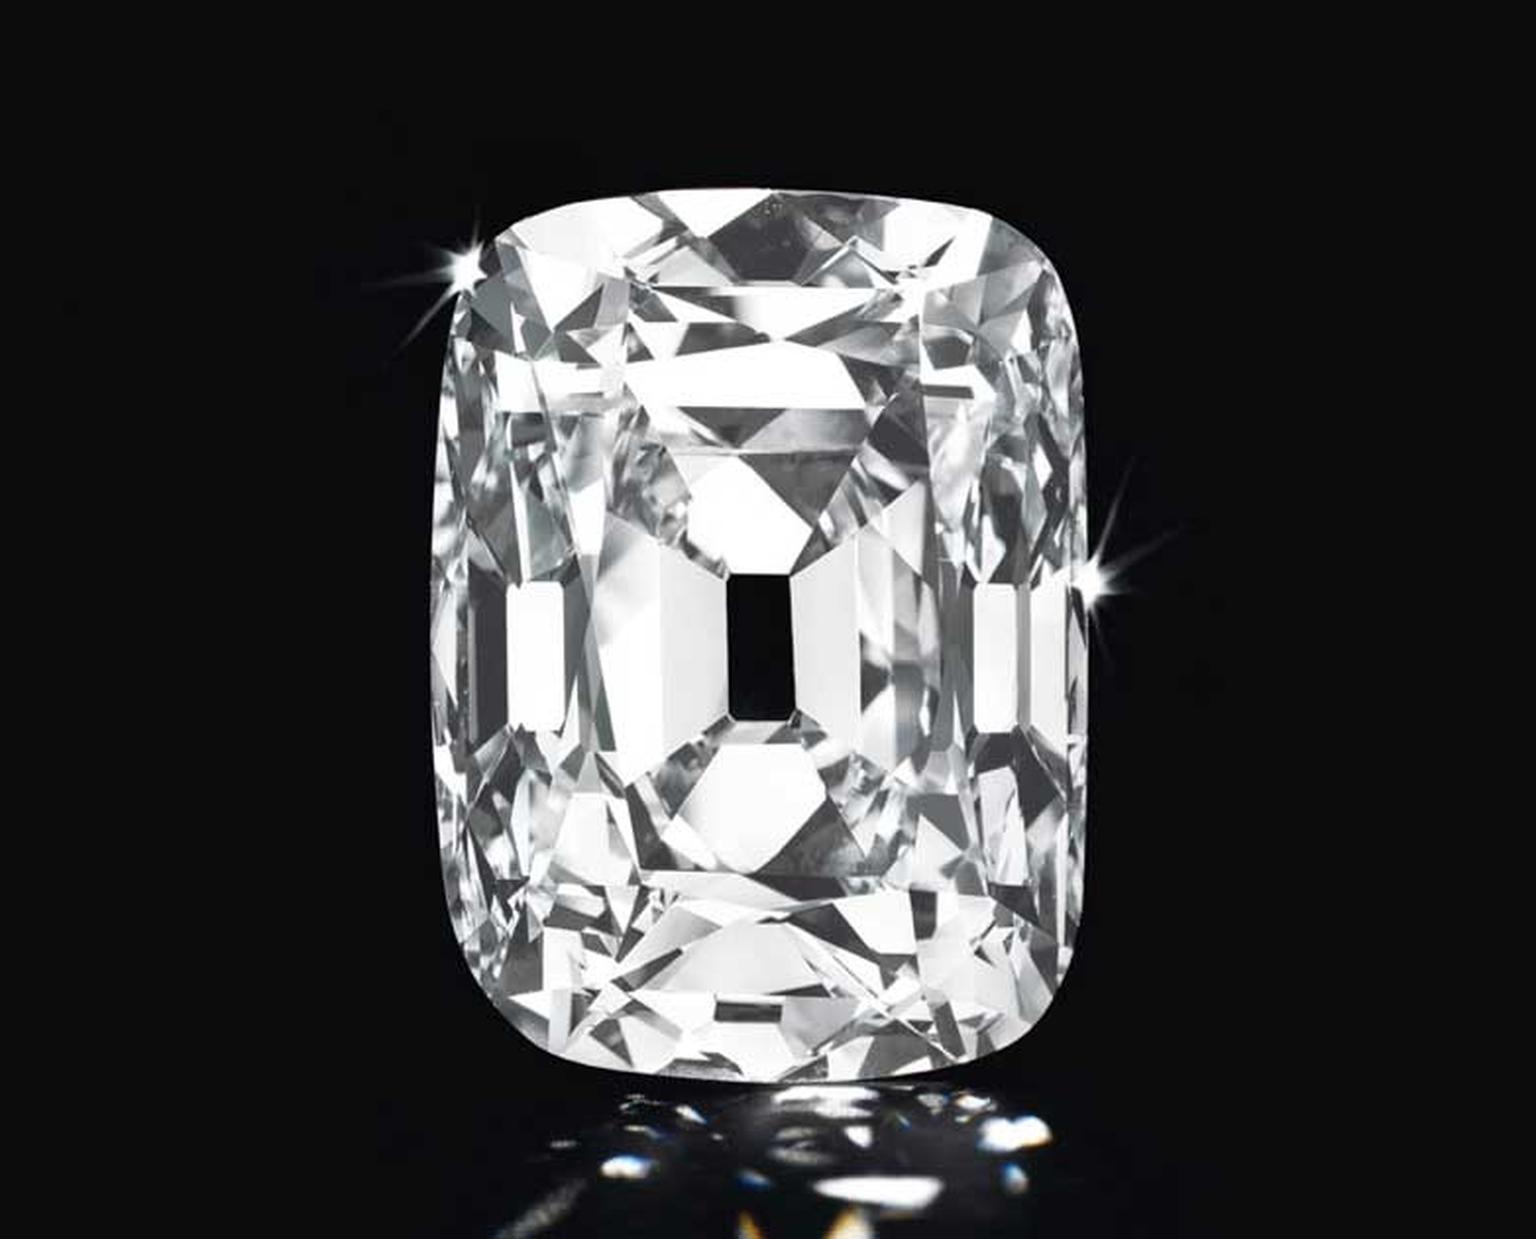 The legendary Archduke Joseph Diamond, a 76.02ct D, IF Golconda diamond, sold for an impressive $21.5 million at Christie's Geneva in 2012. It holds the world record for the highest price paid per carat for a colourless diamond at auction.